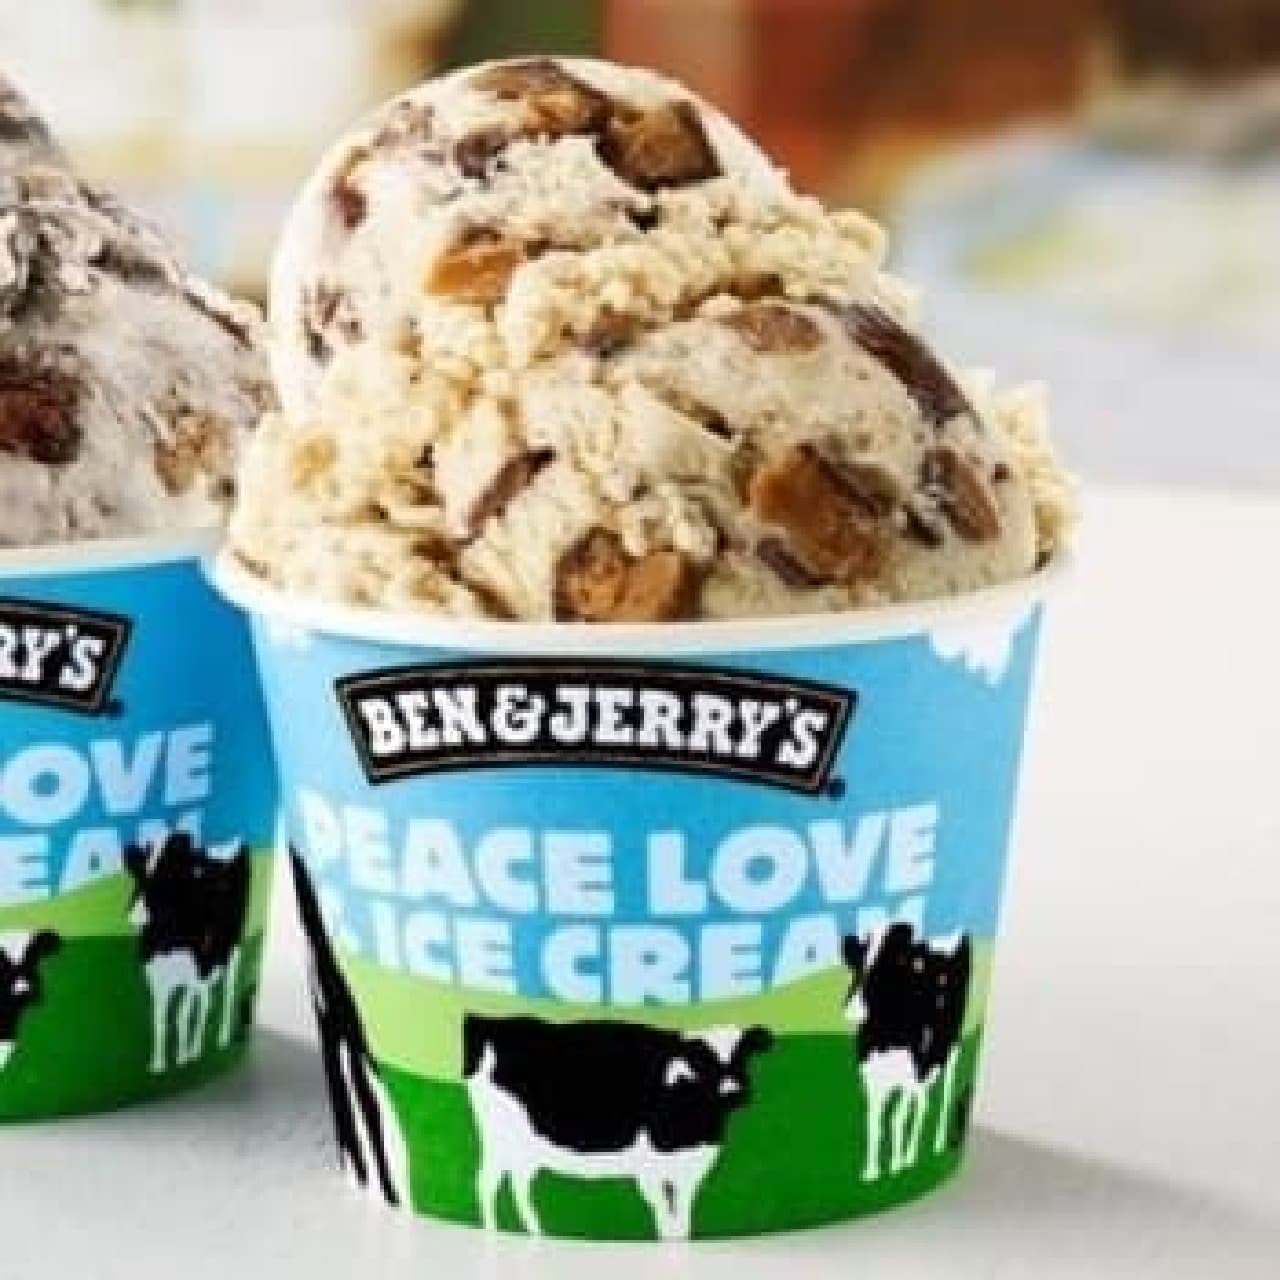 Choose your favorite flavor (Image / Source: BEN & JERRY'S official Facebook page)